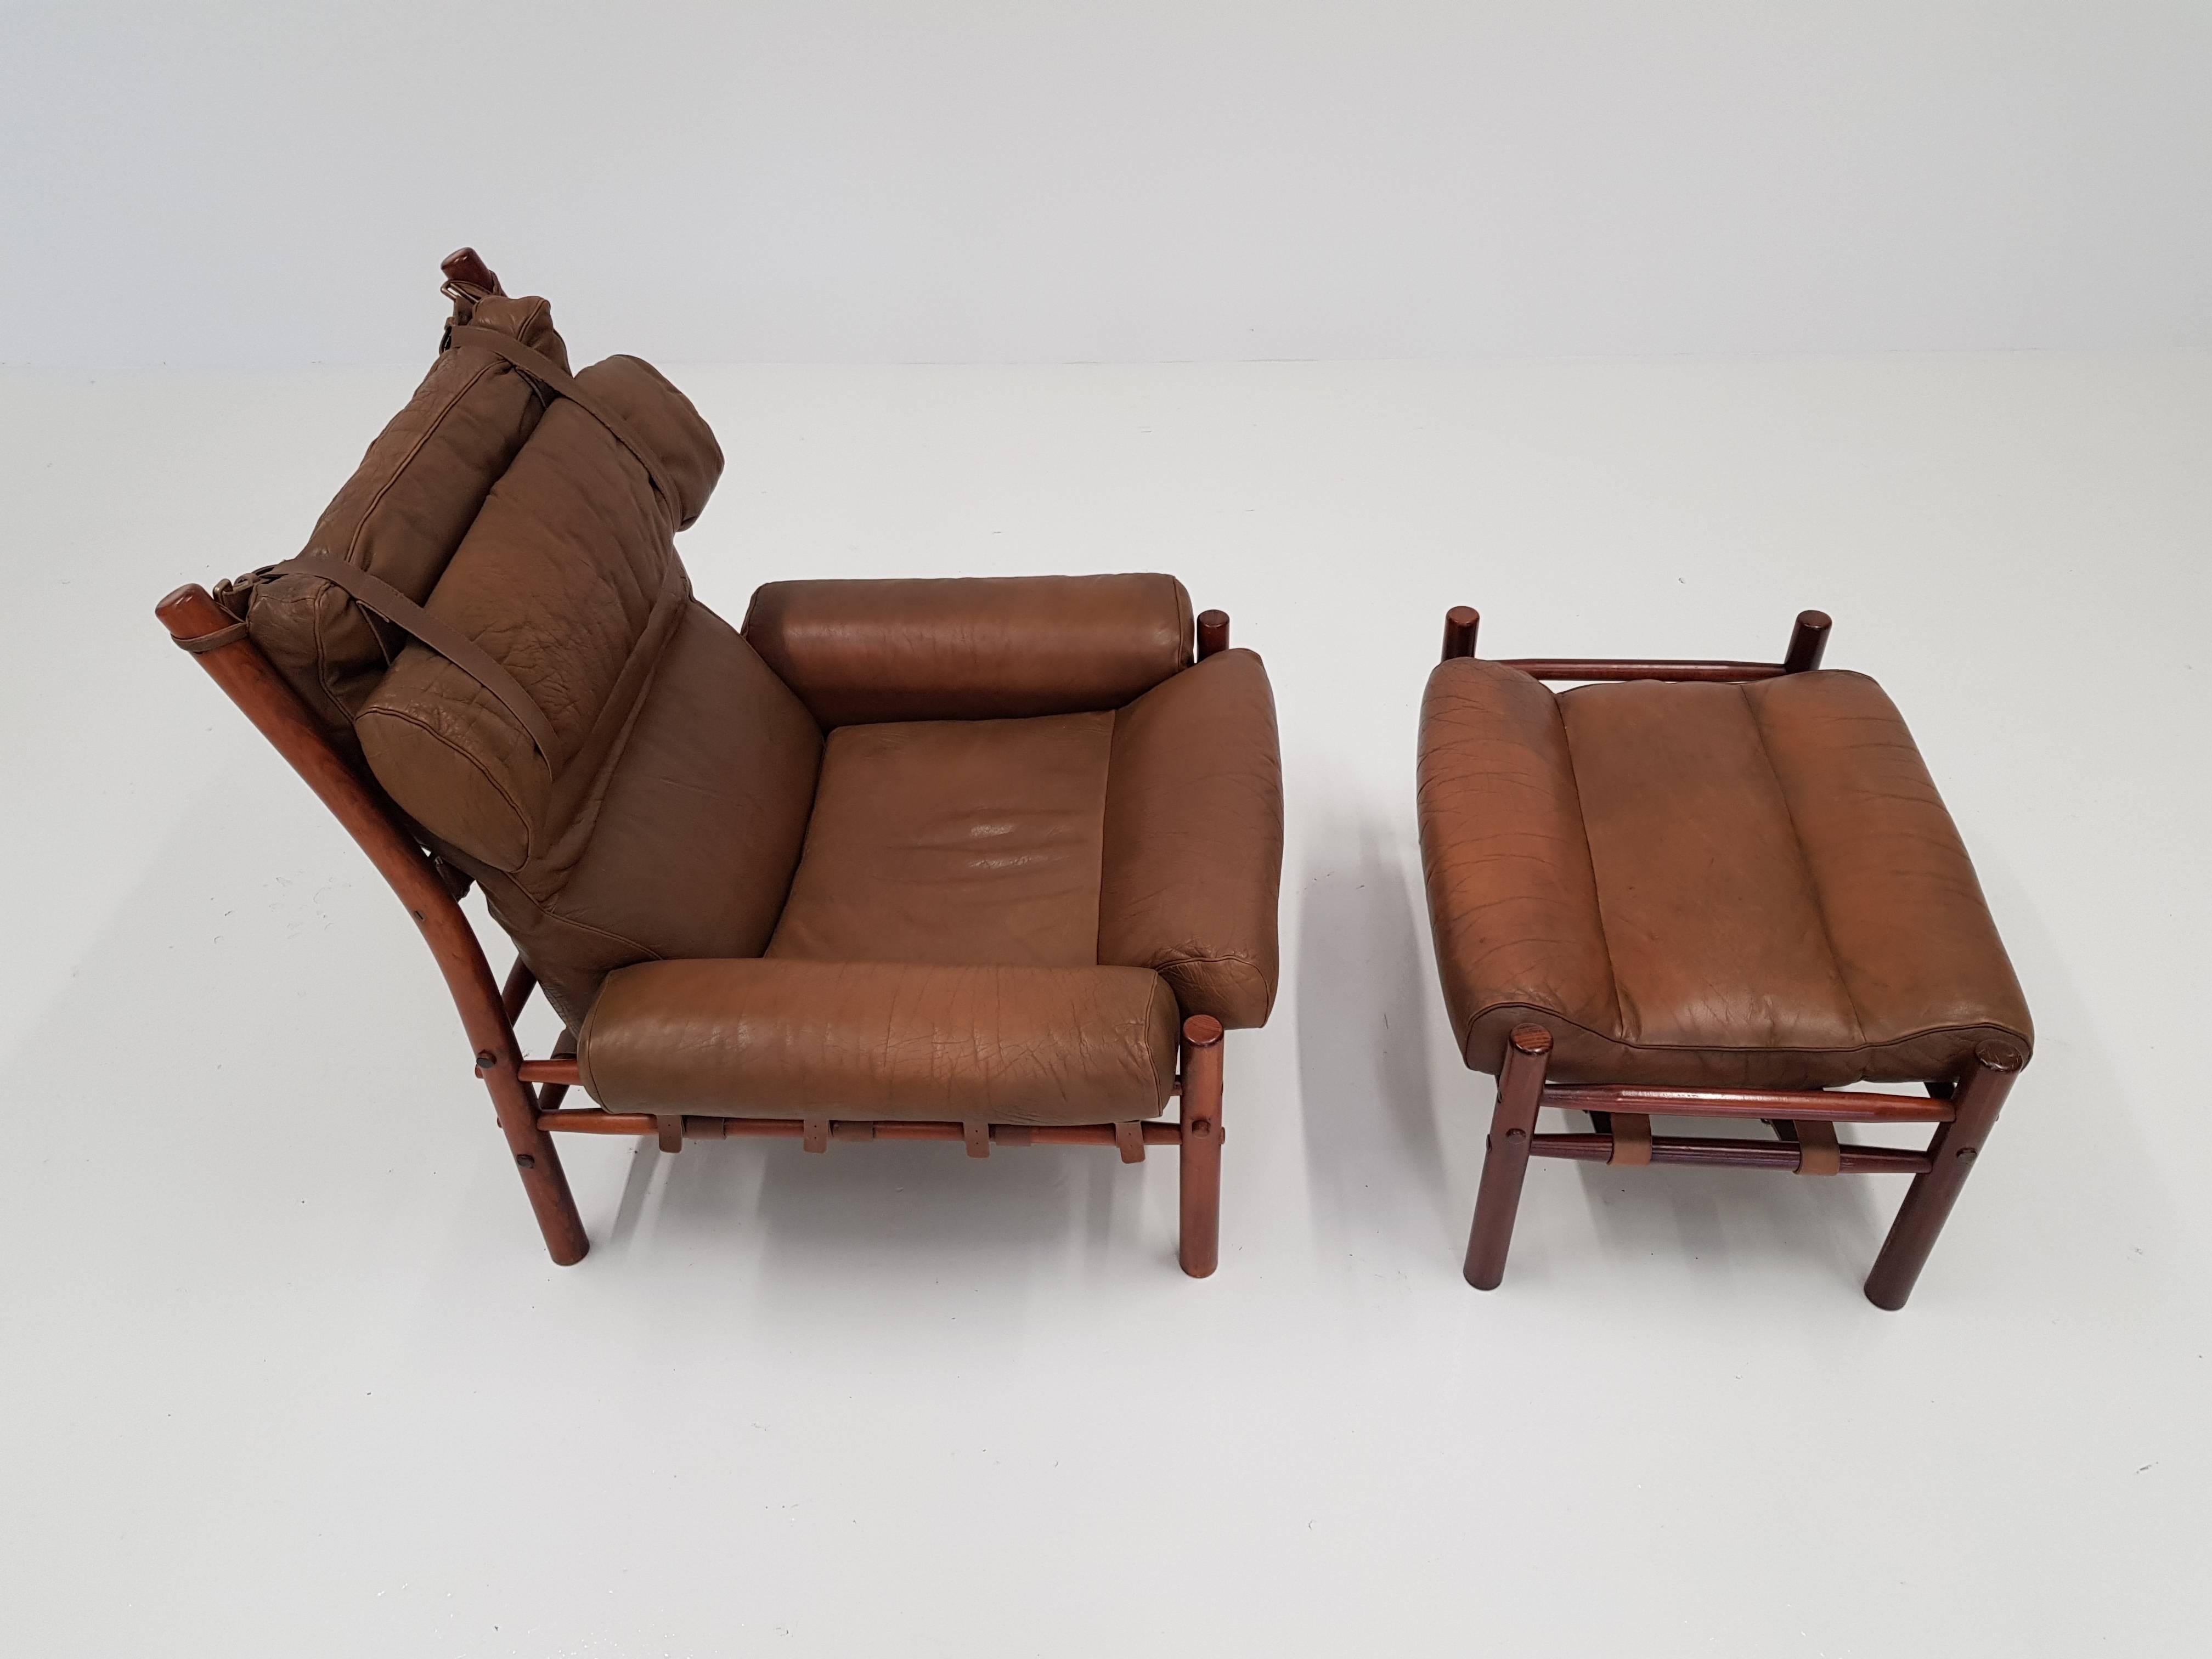 Stained Inca Chair and Footstool by Swedish Designer Arne Norell for Norell Möbler